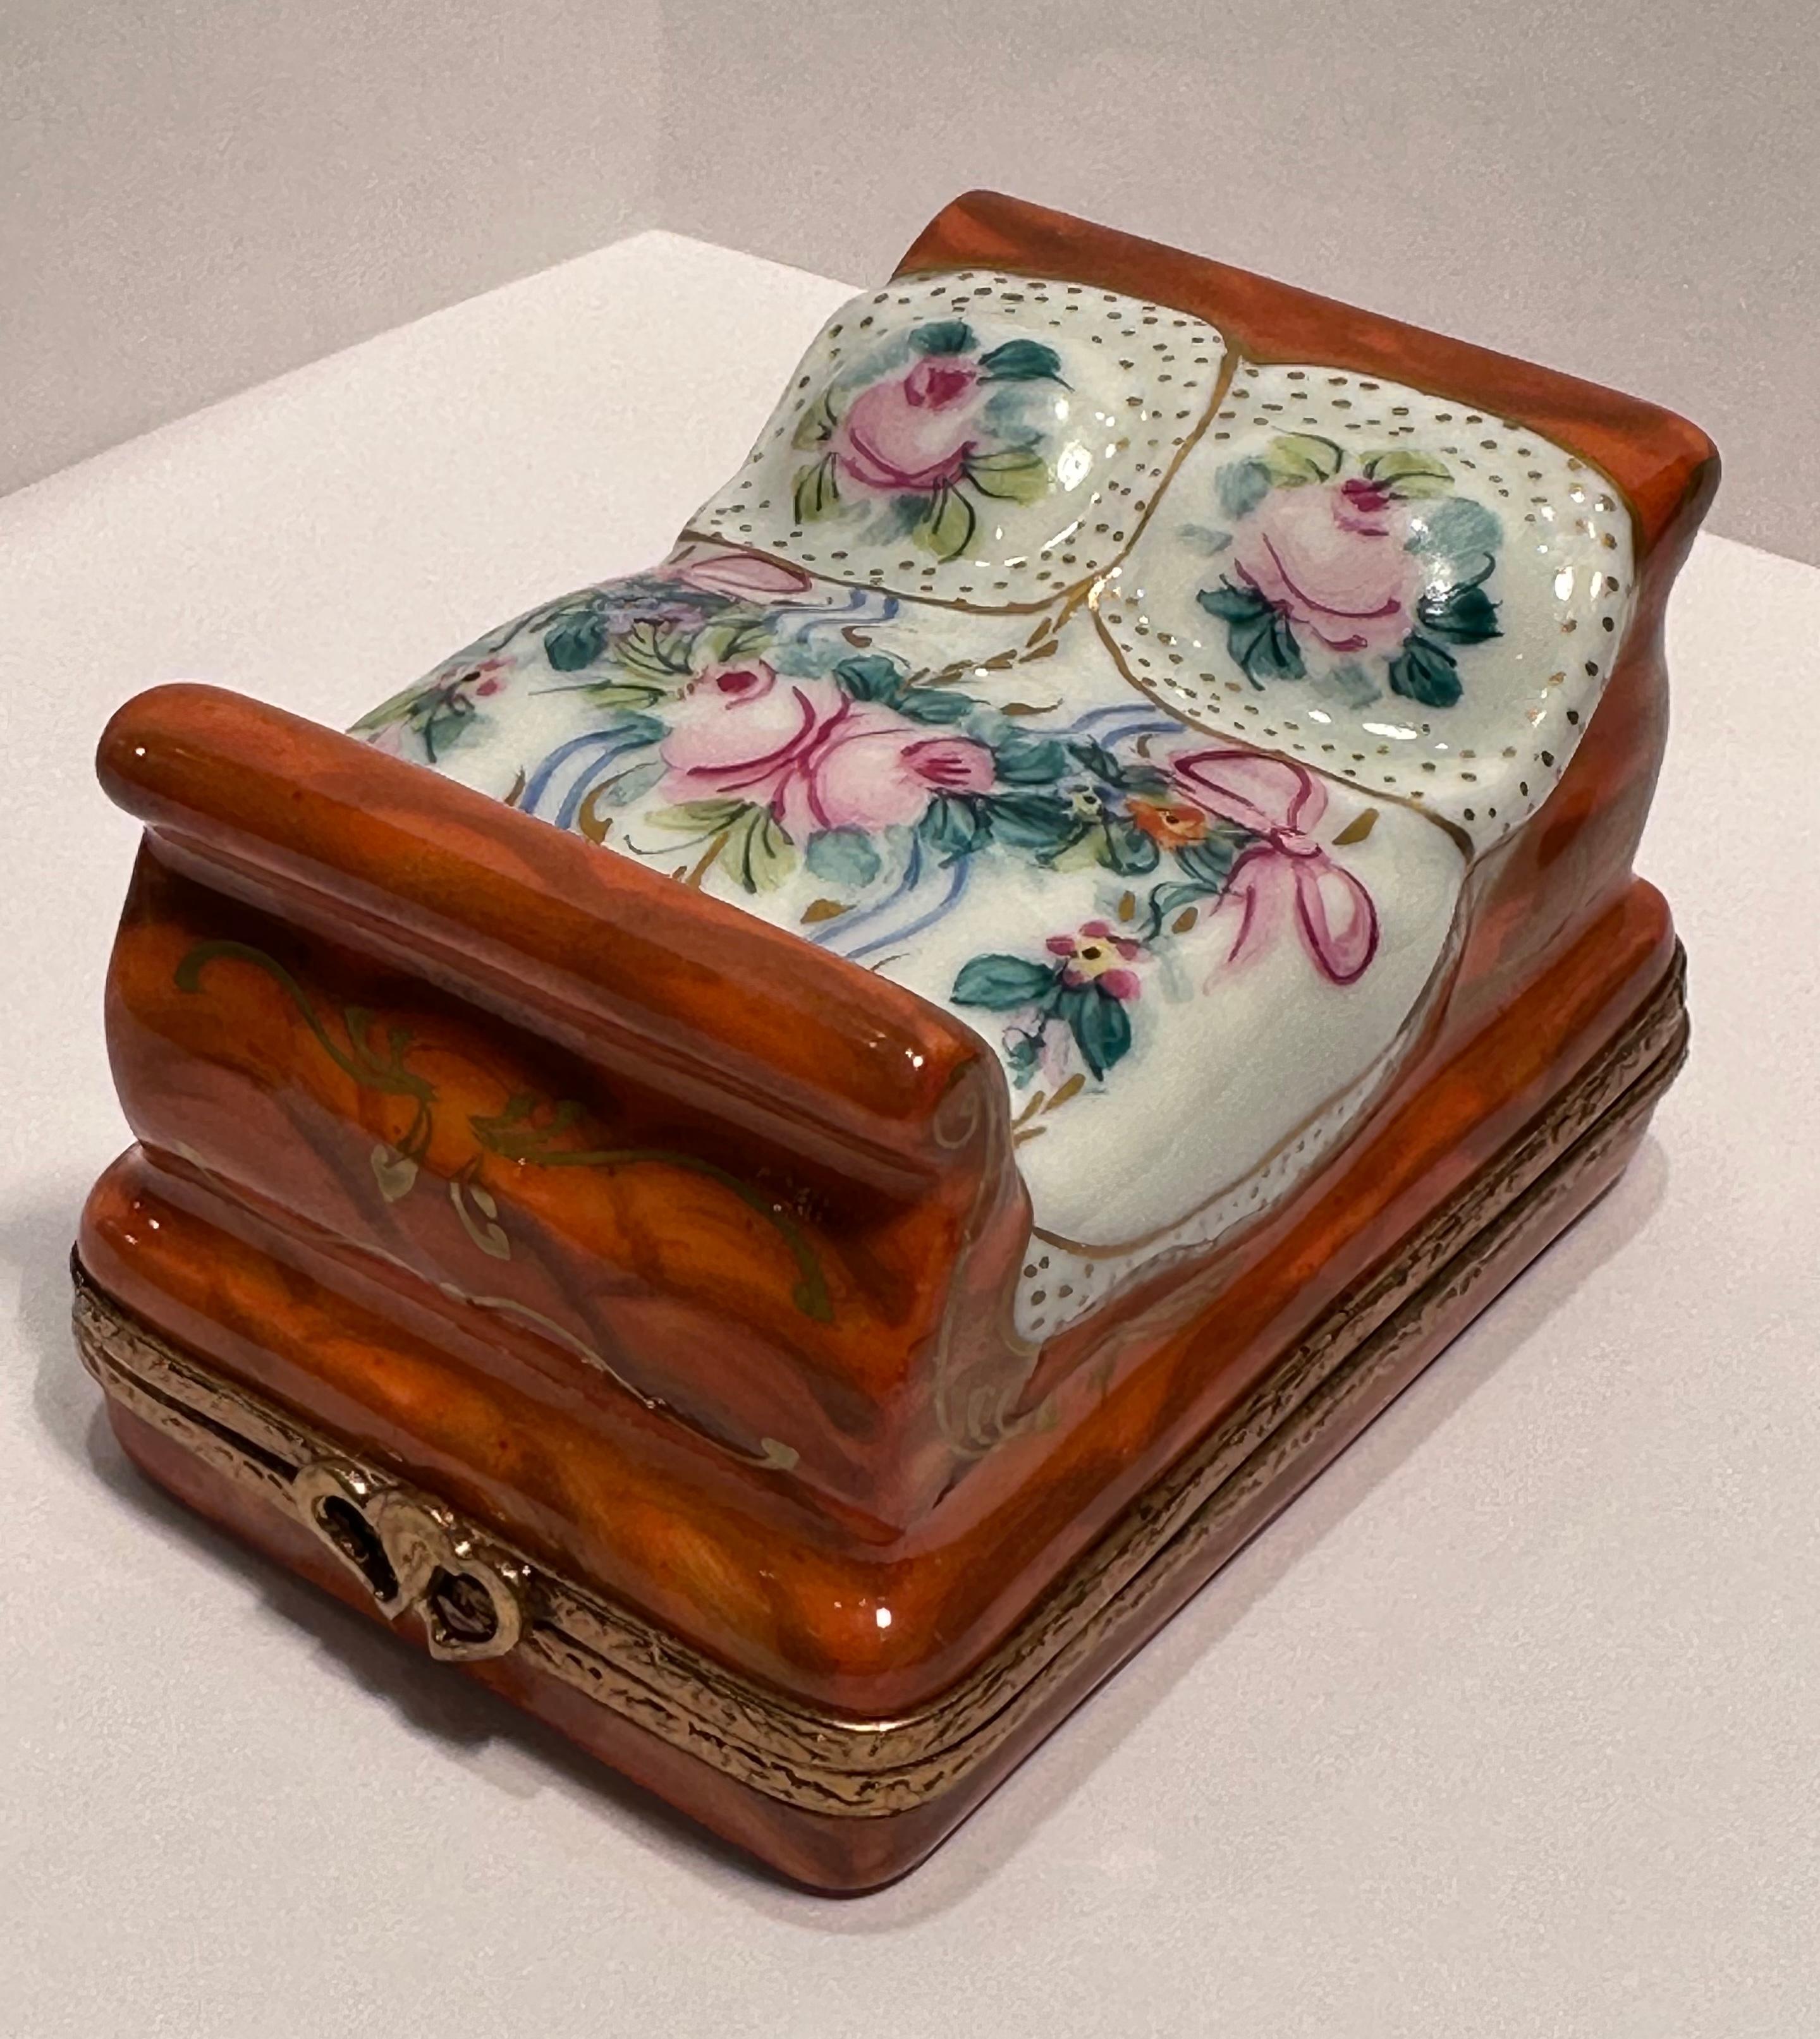 Hand-Painted Limoges France Hand Painted French Sleigh Bed Porcelain Trinket Box